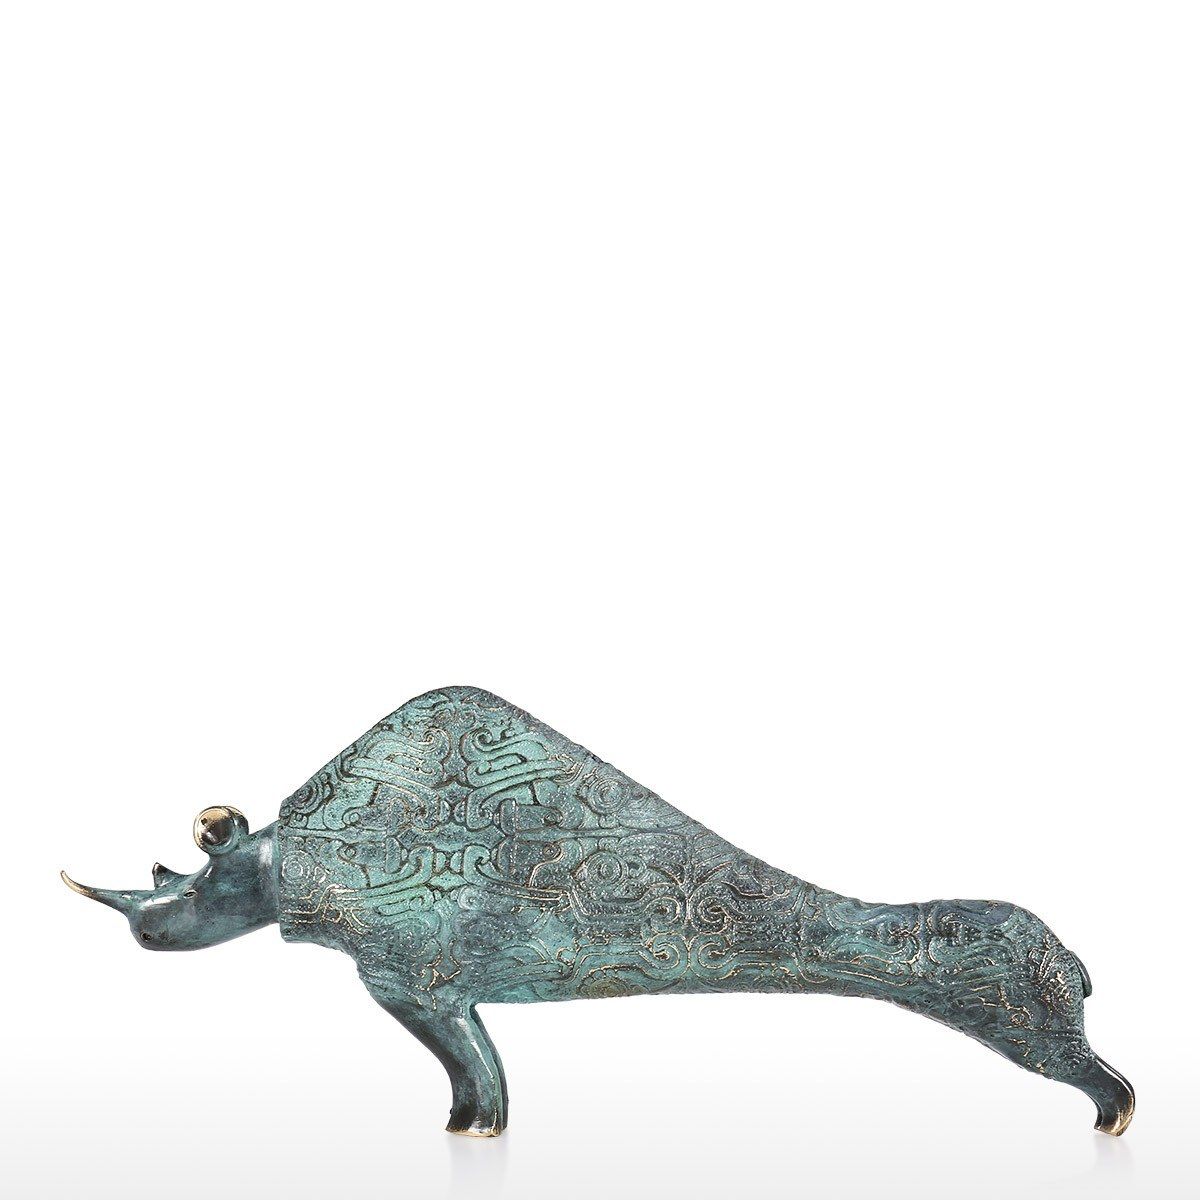 Rhinoceros with Sculpture and Statue Bronze Material for Home Decor and Unique Gifts Animal Lovers